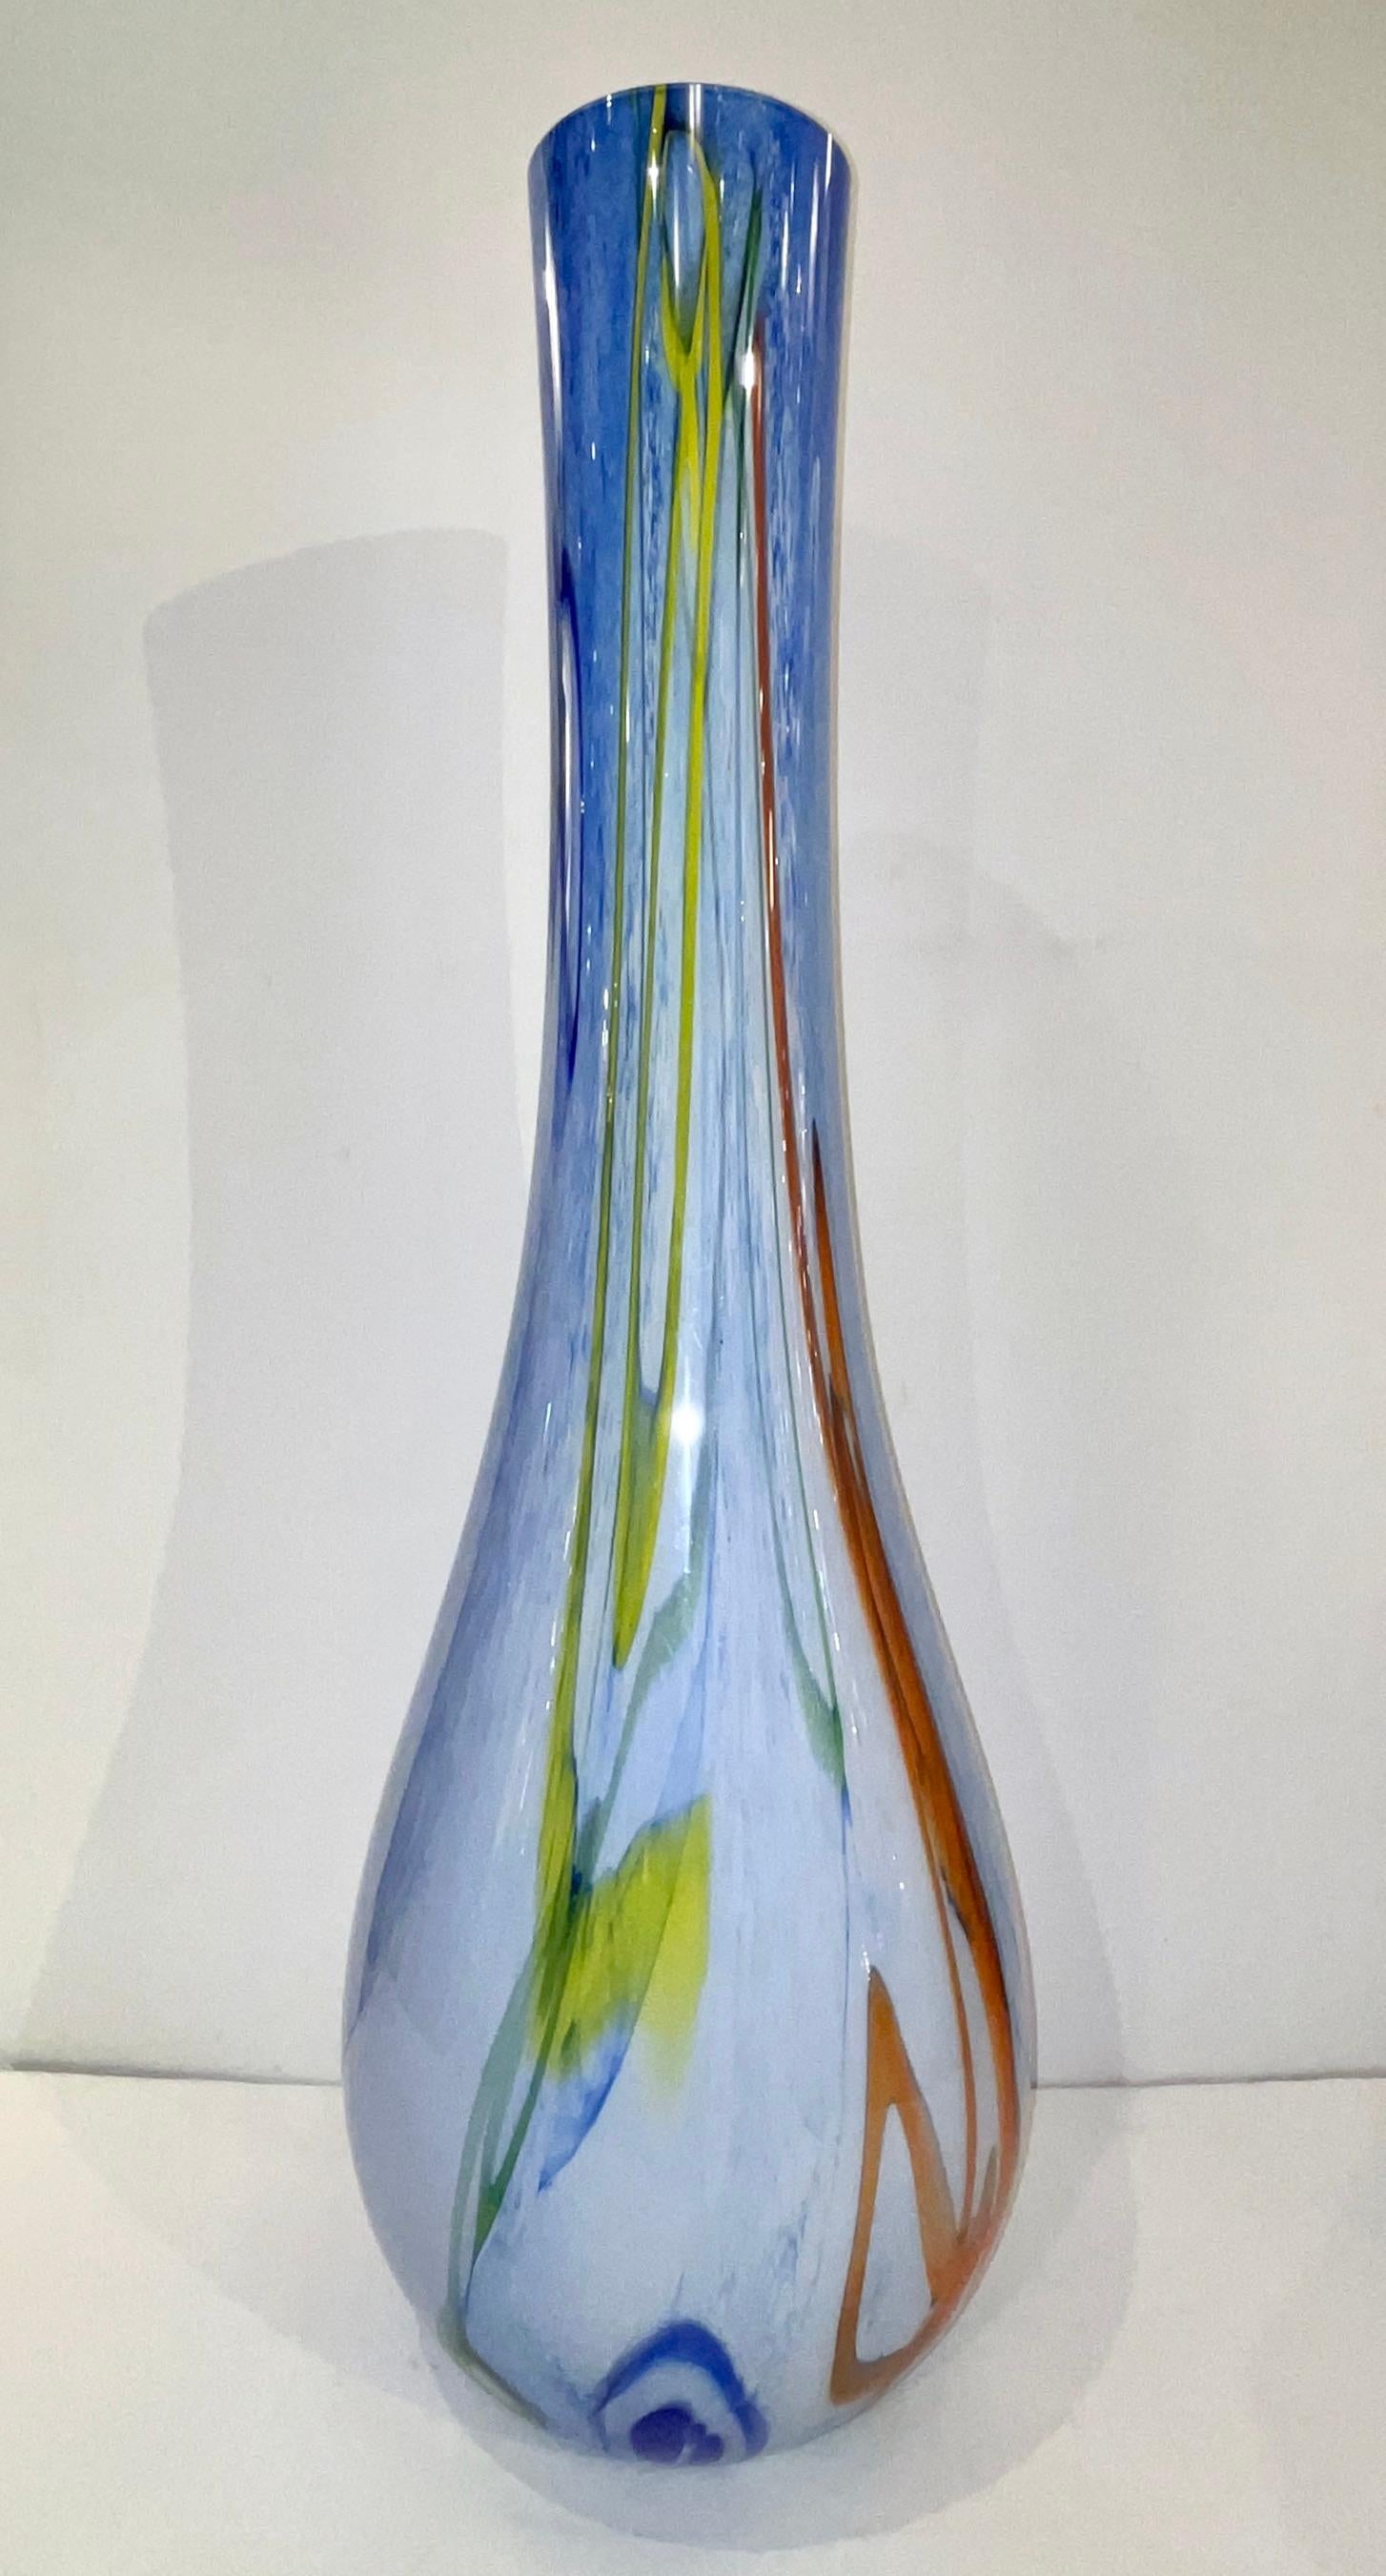 A striking huge Murano glass vase, impressive in size, a Work of Art in blown overlaid Murano glass worked like a modern painting with a sophisticated extensive swirling organic decor of overlaid elongated murrine in turquoise, azure, orange brown,